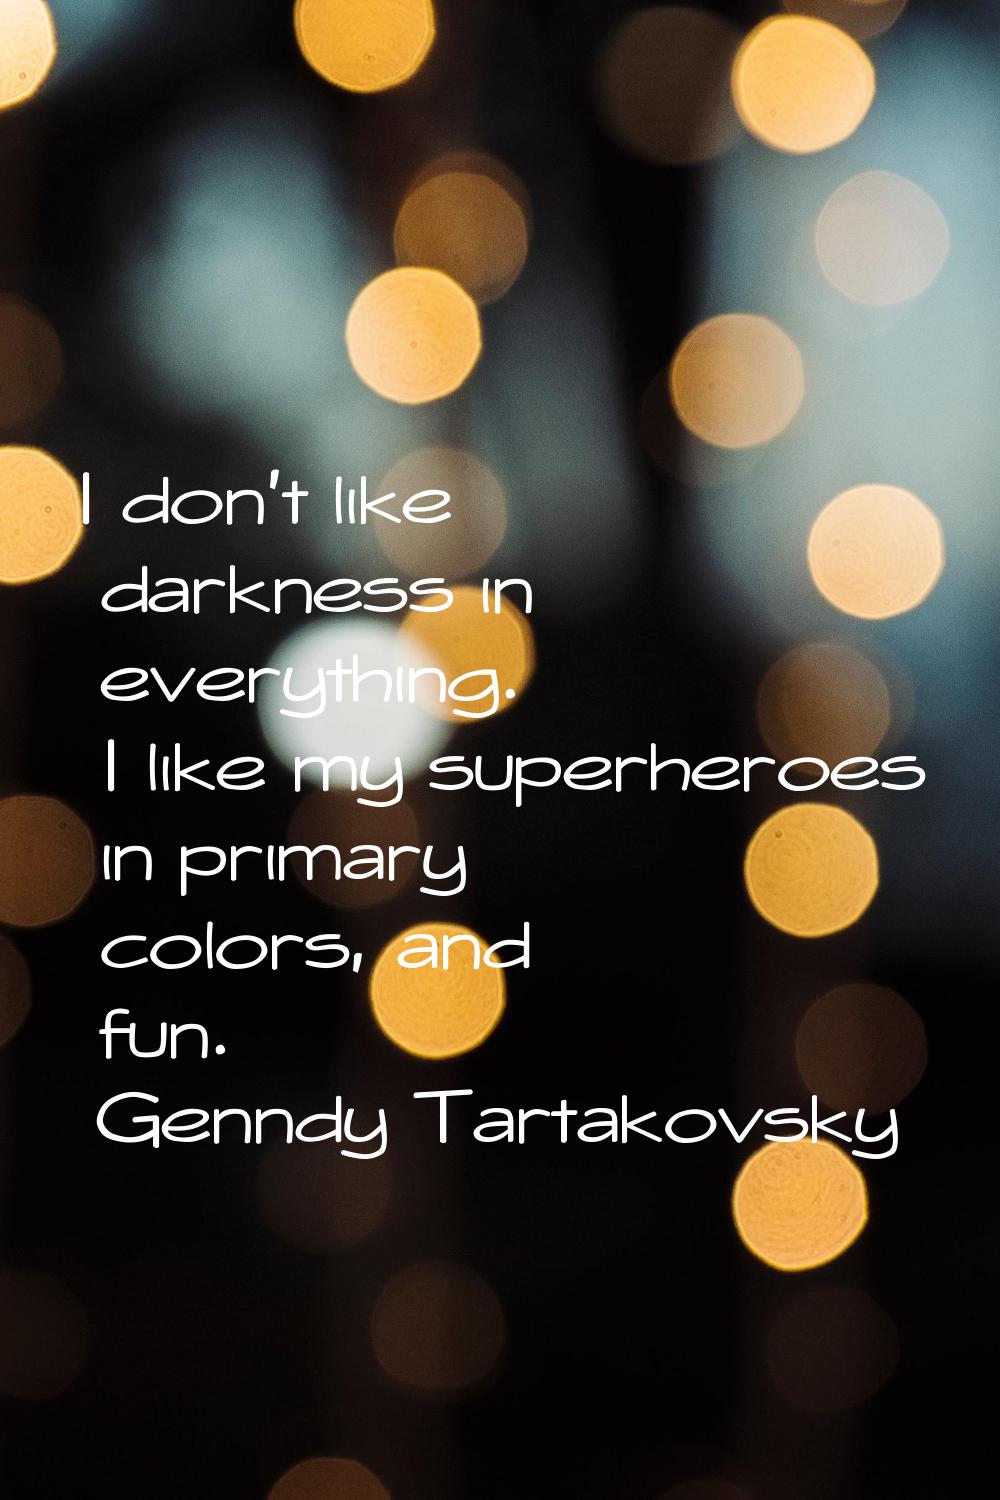 I don't like darkness in everything. I like my superheroes in primary colors, and fun.